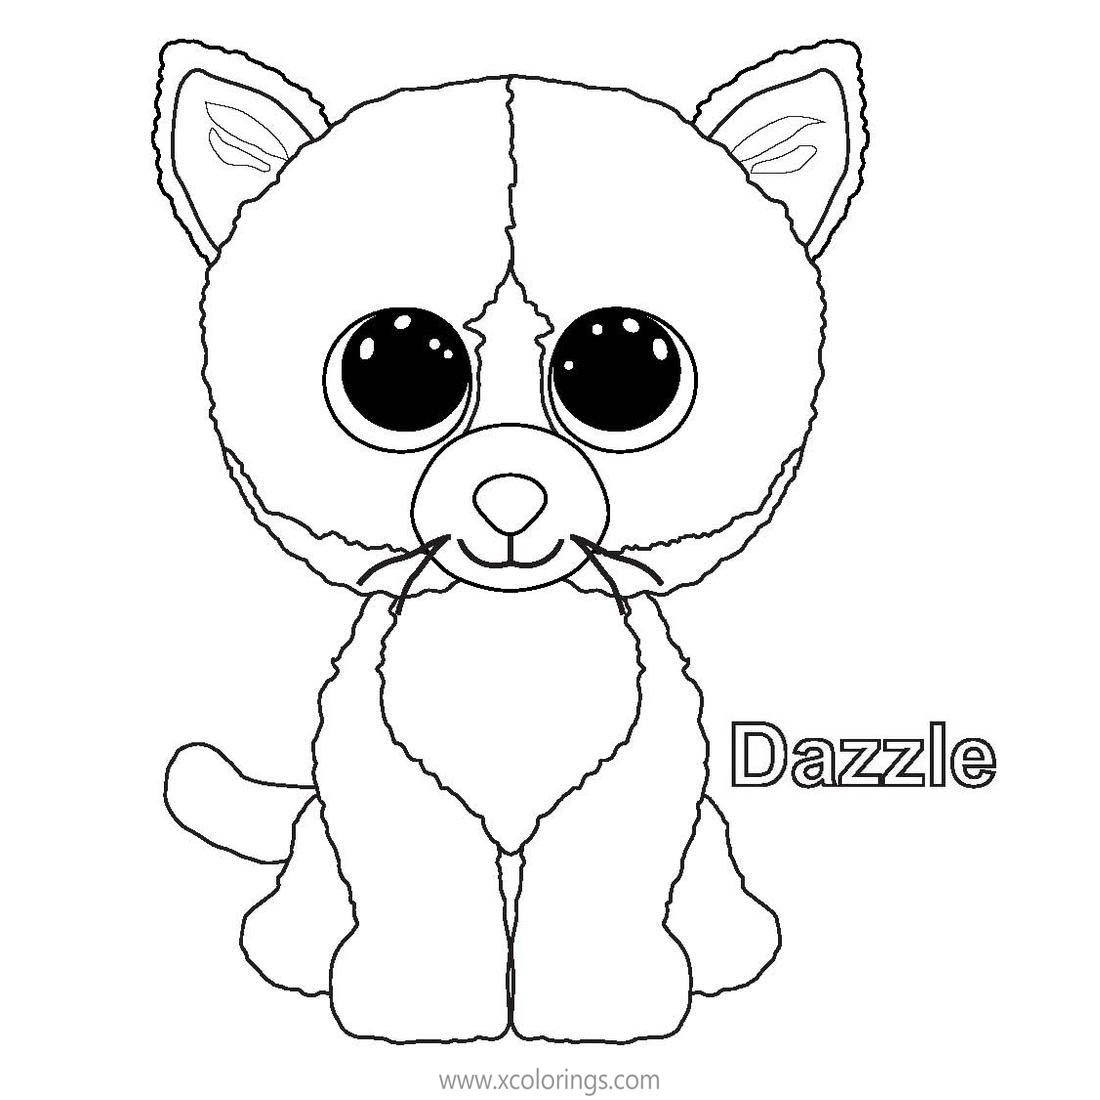 Free Beanie Boos Coloring Pages Dazzle printable